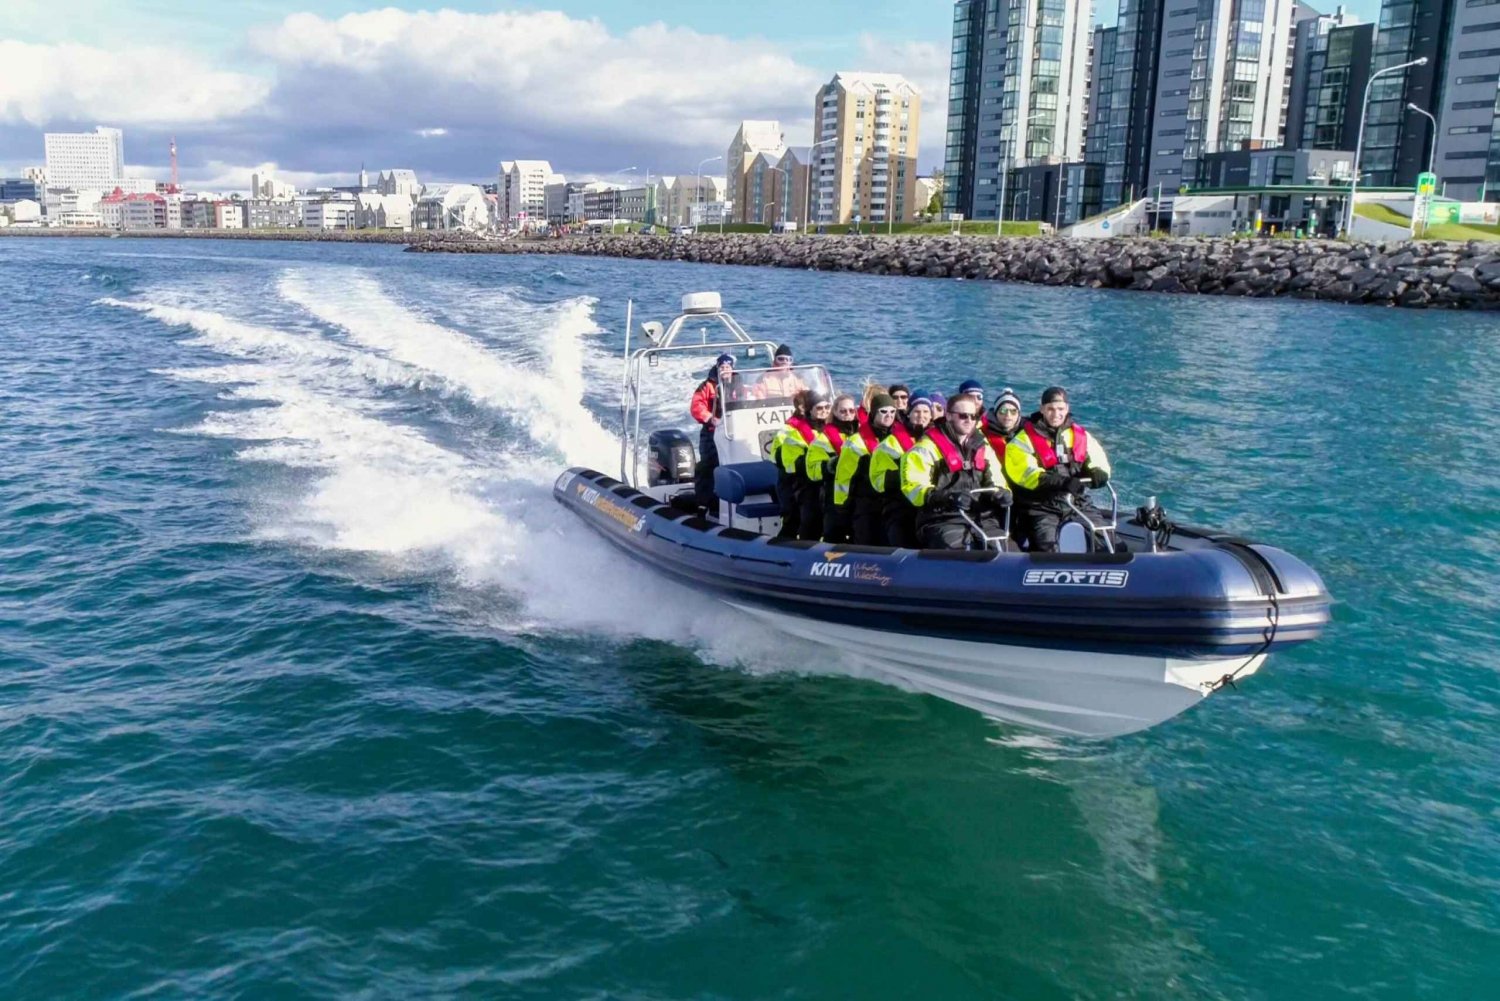 From Reykjavik: Whale Watching Tour by Speedboat